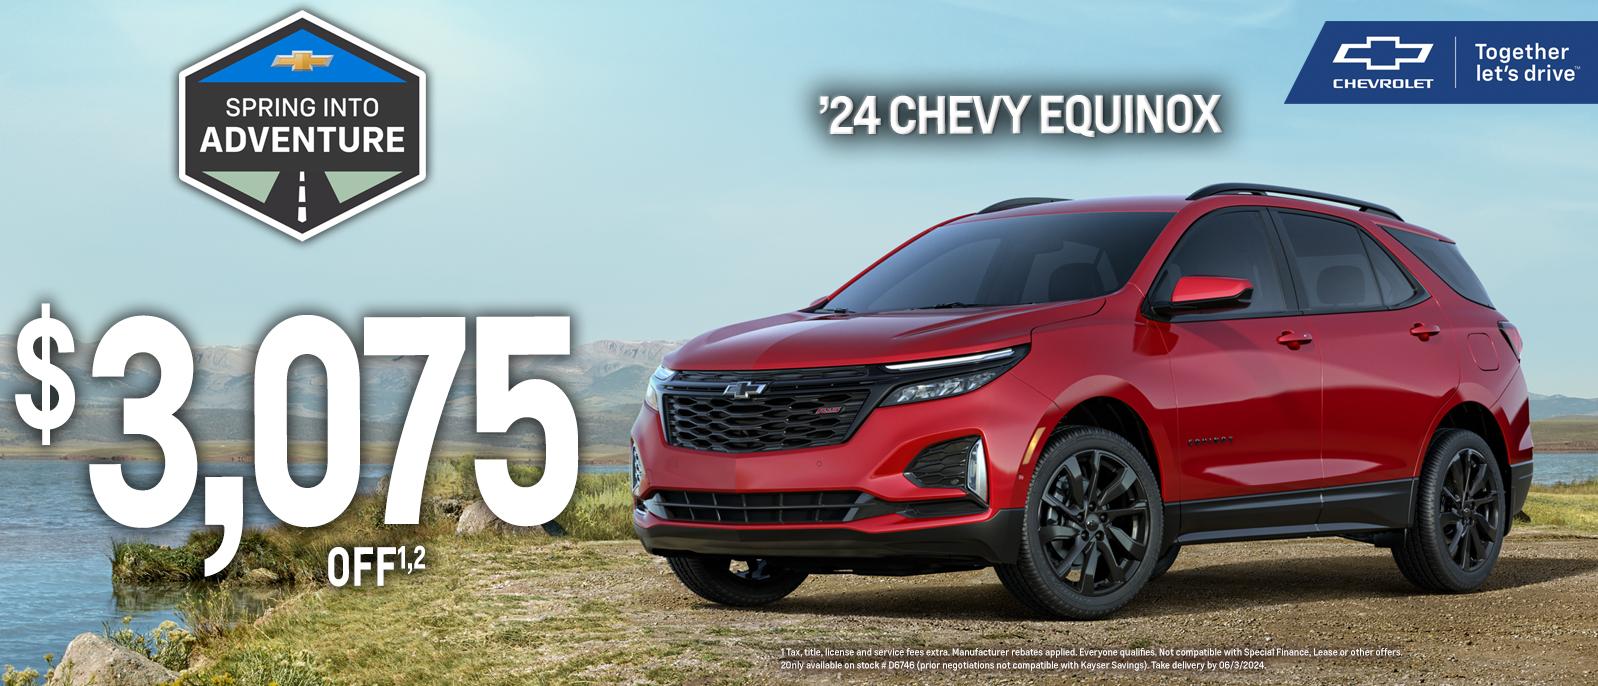 24 chevy equinox | Spring sales event